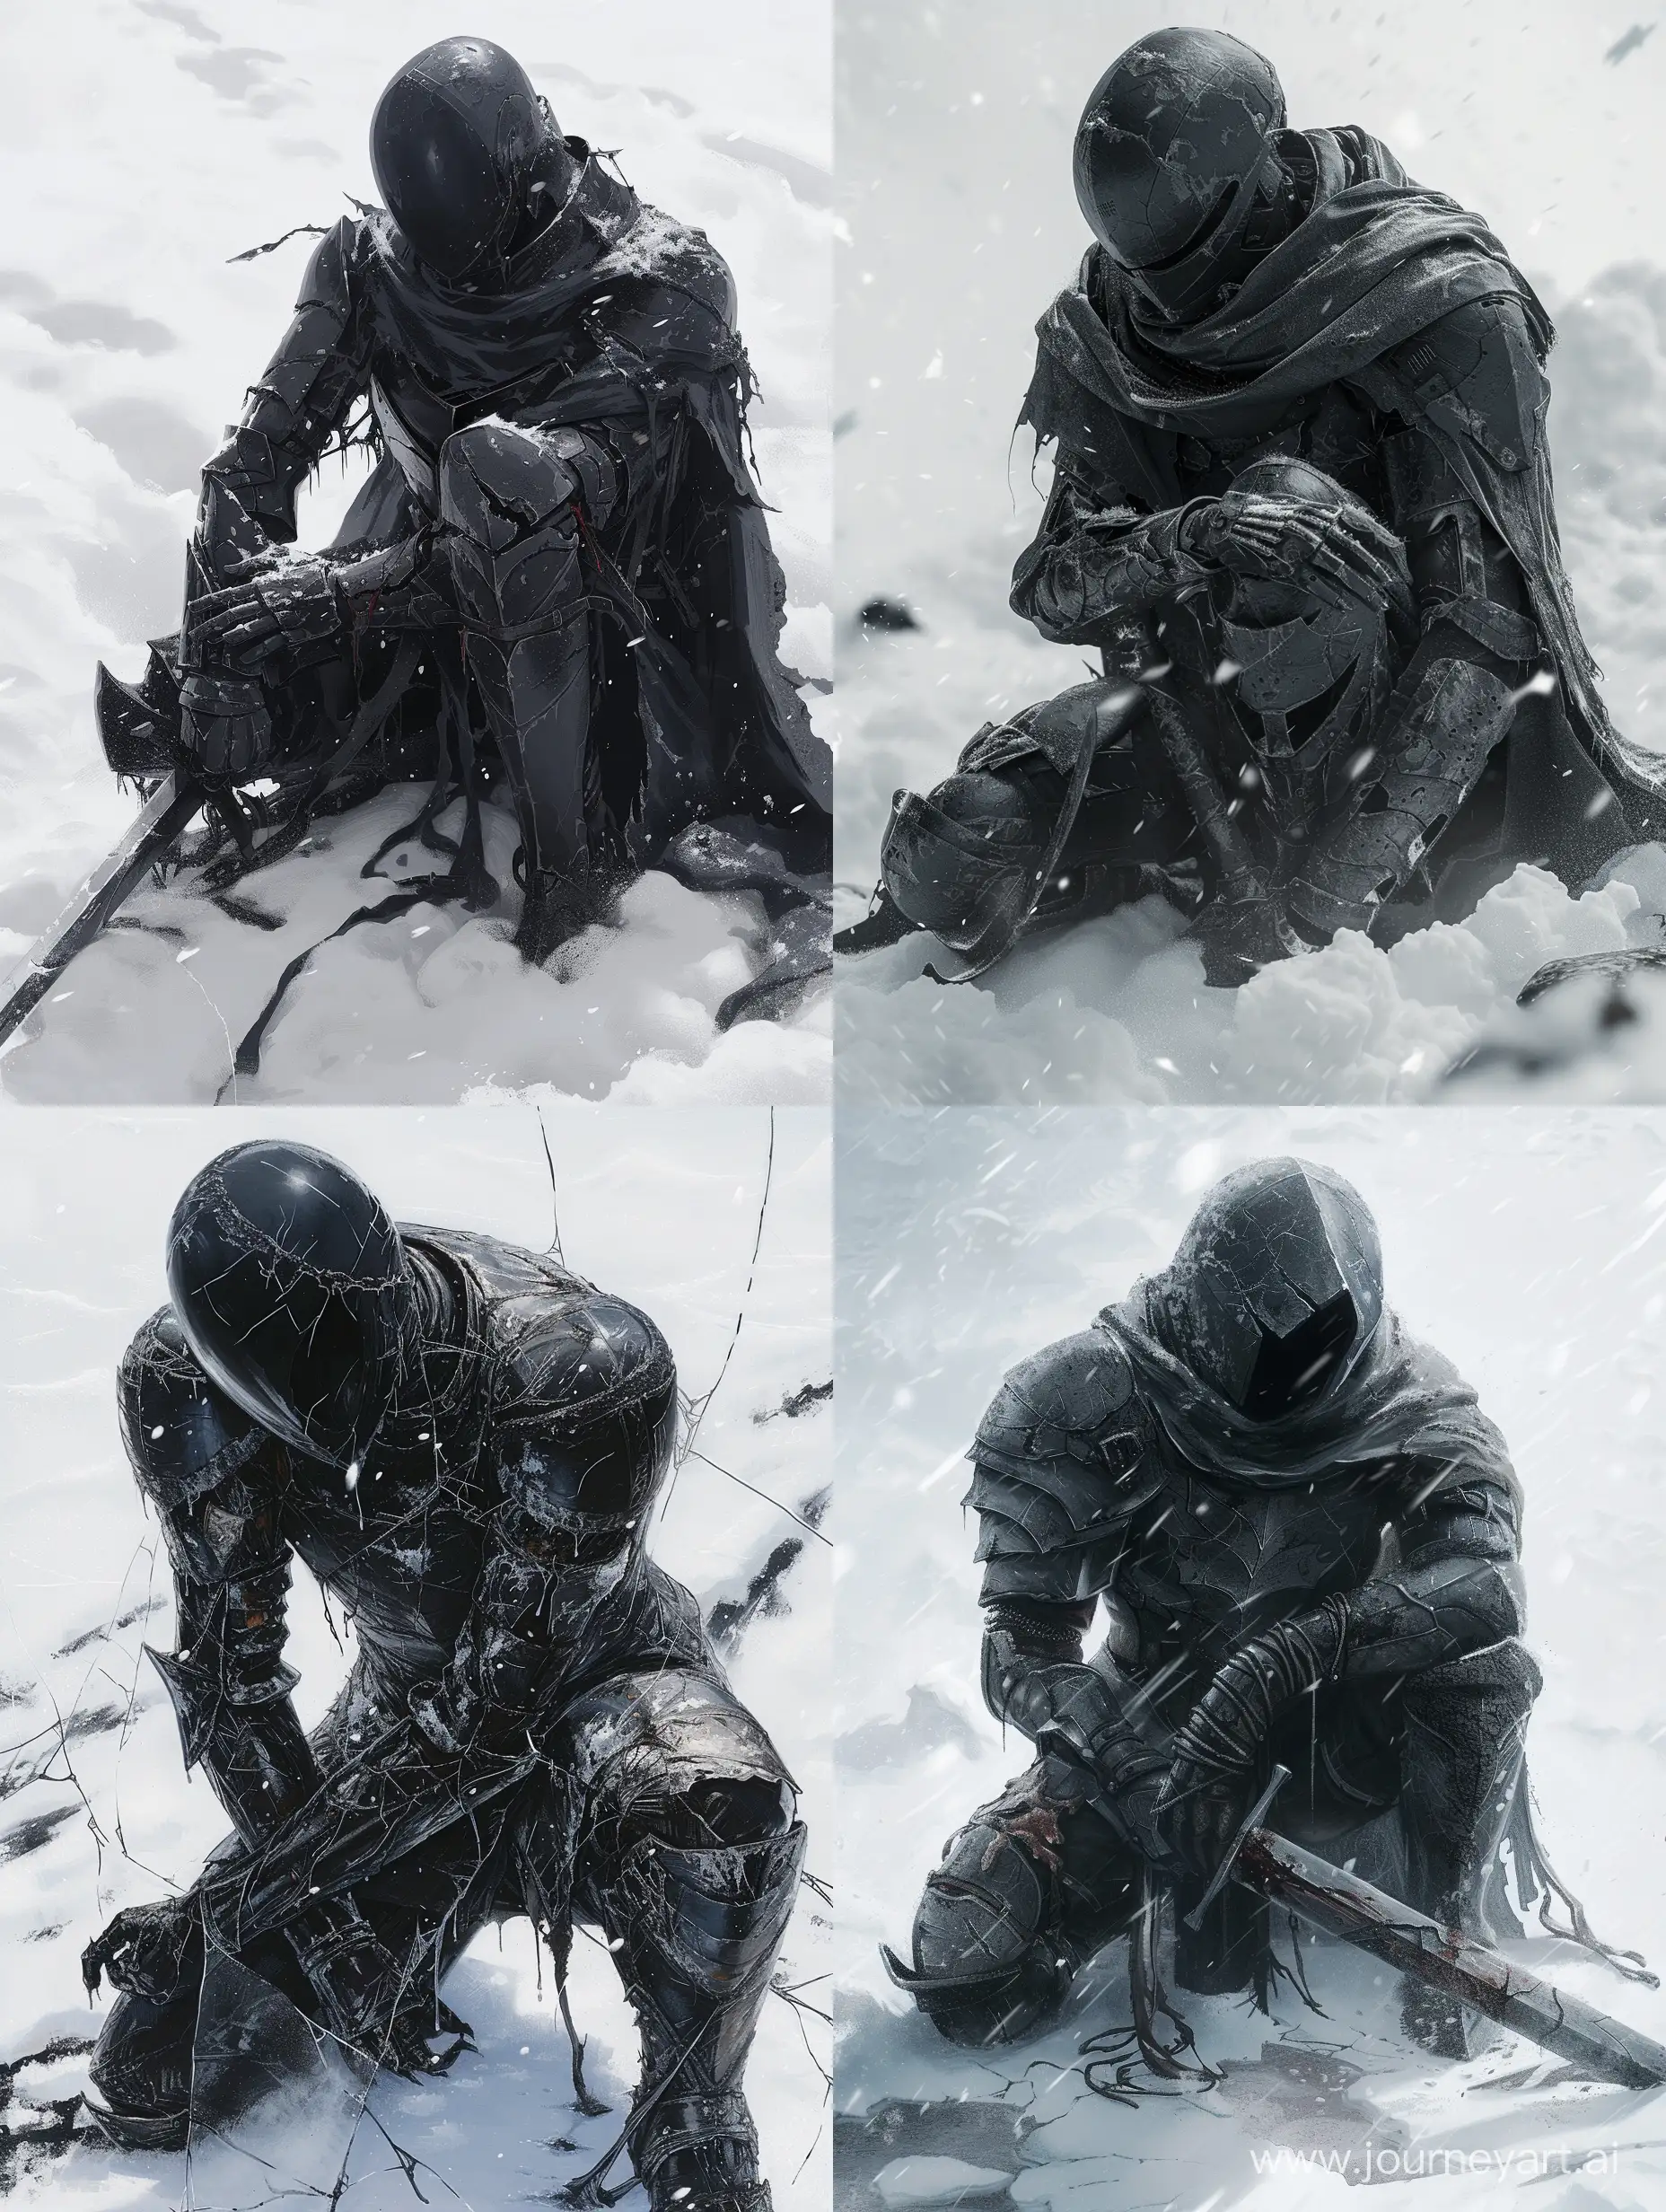 music album cover, clear art, black sci fi knight assassin, wounded, kneeling tiredly. in the snow, cracked, darksouls style